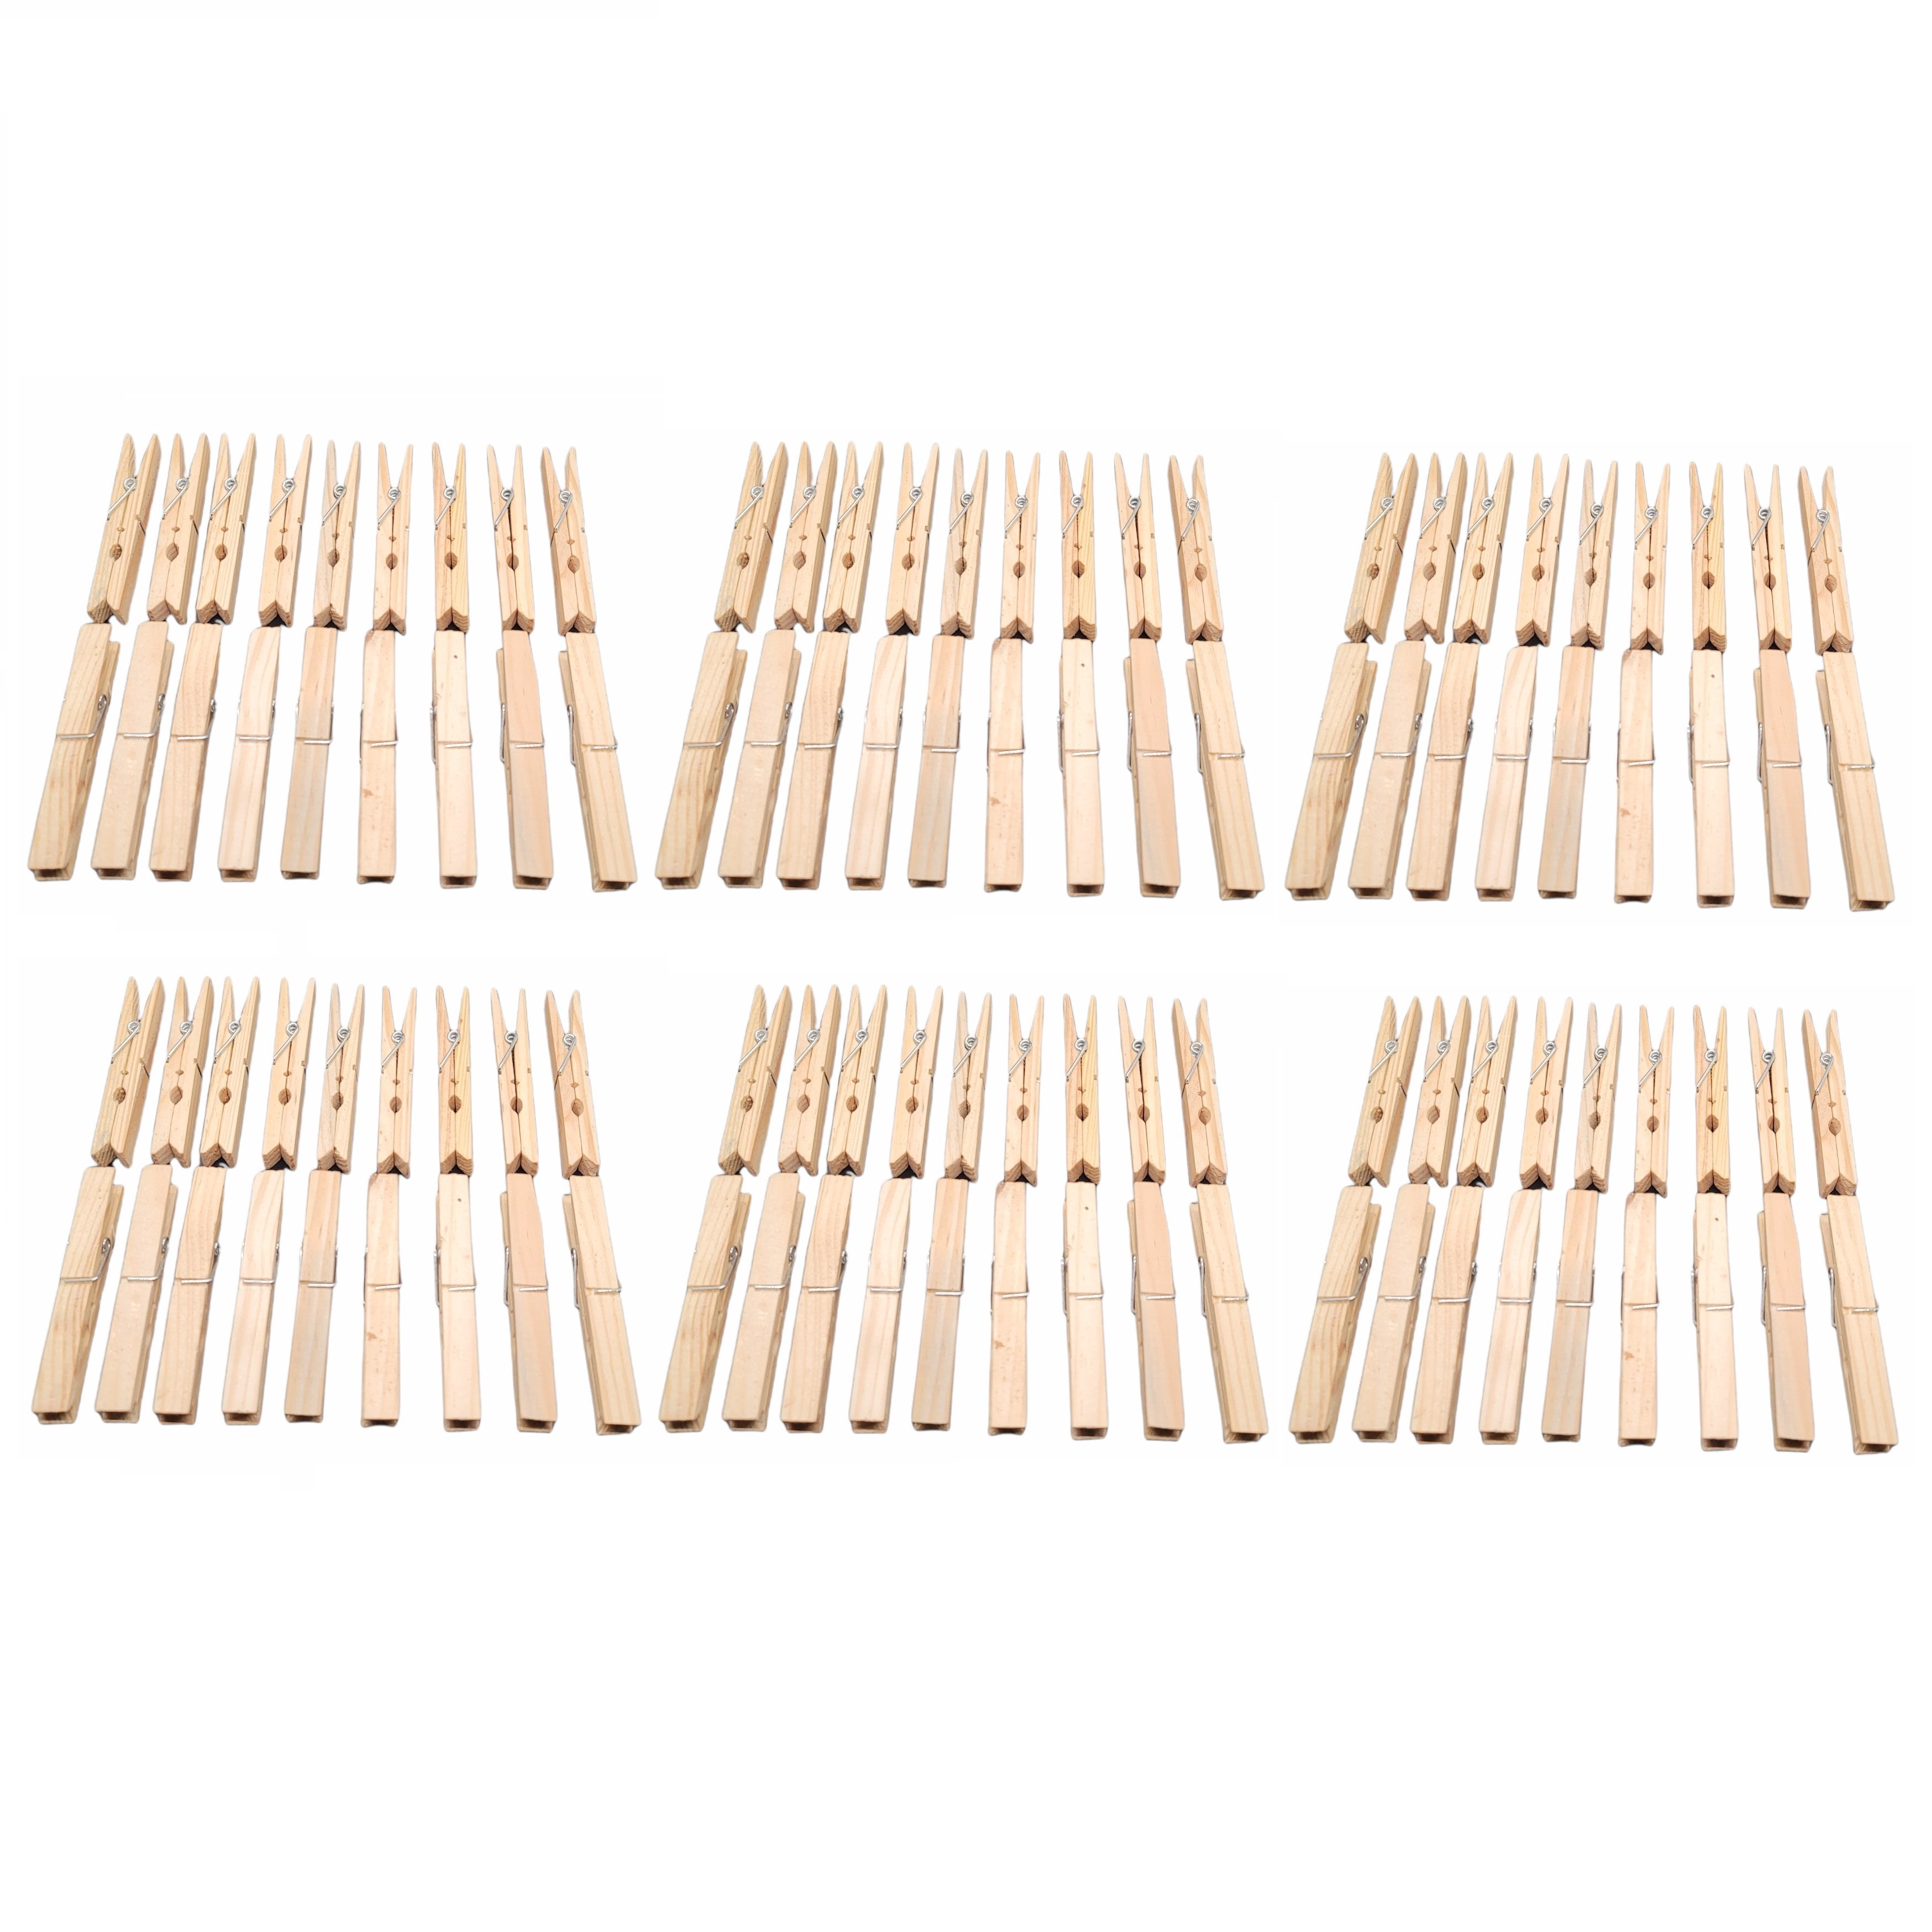 260+ Wooden Clothes Pins Spring Loaded 3 Sizes Nearly 5 Lbs